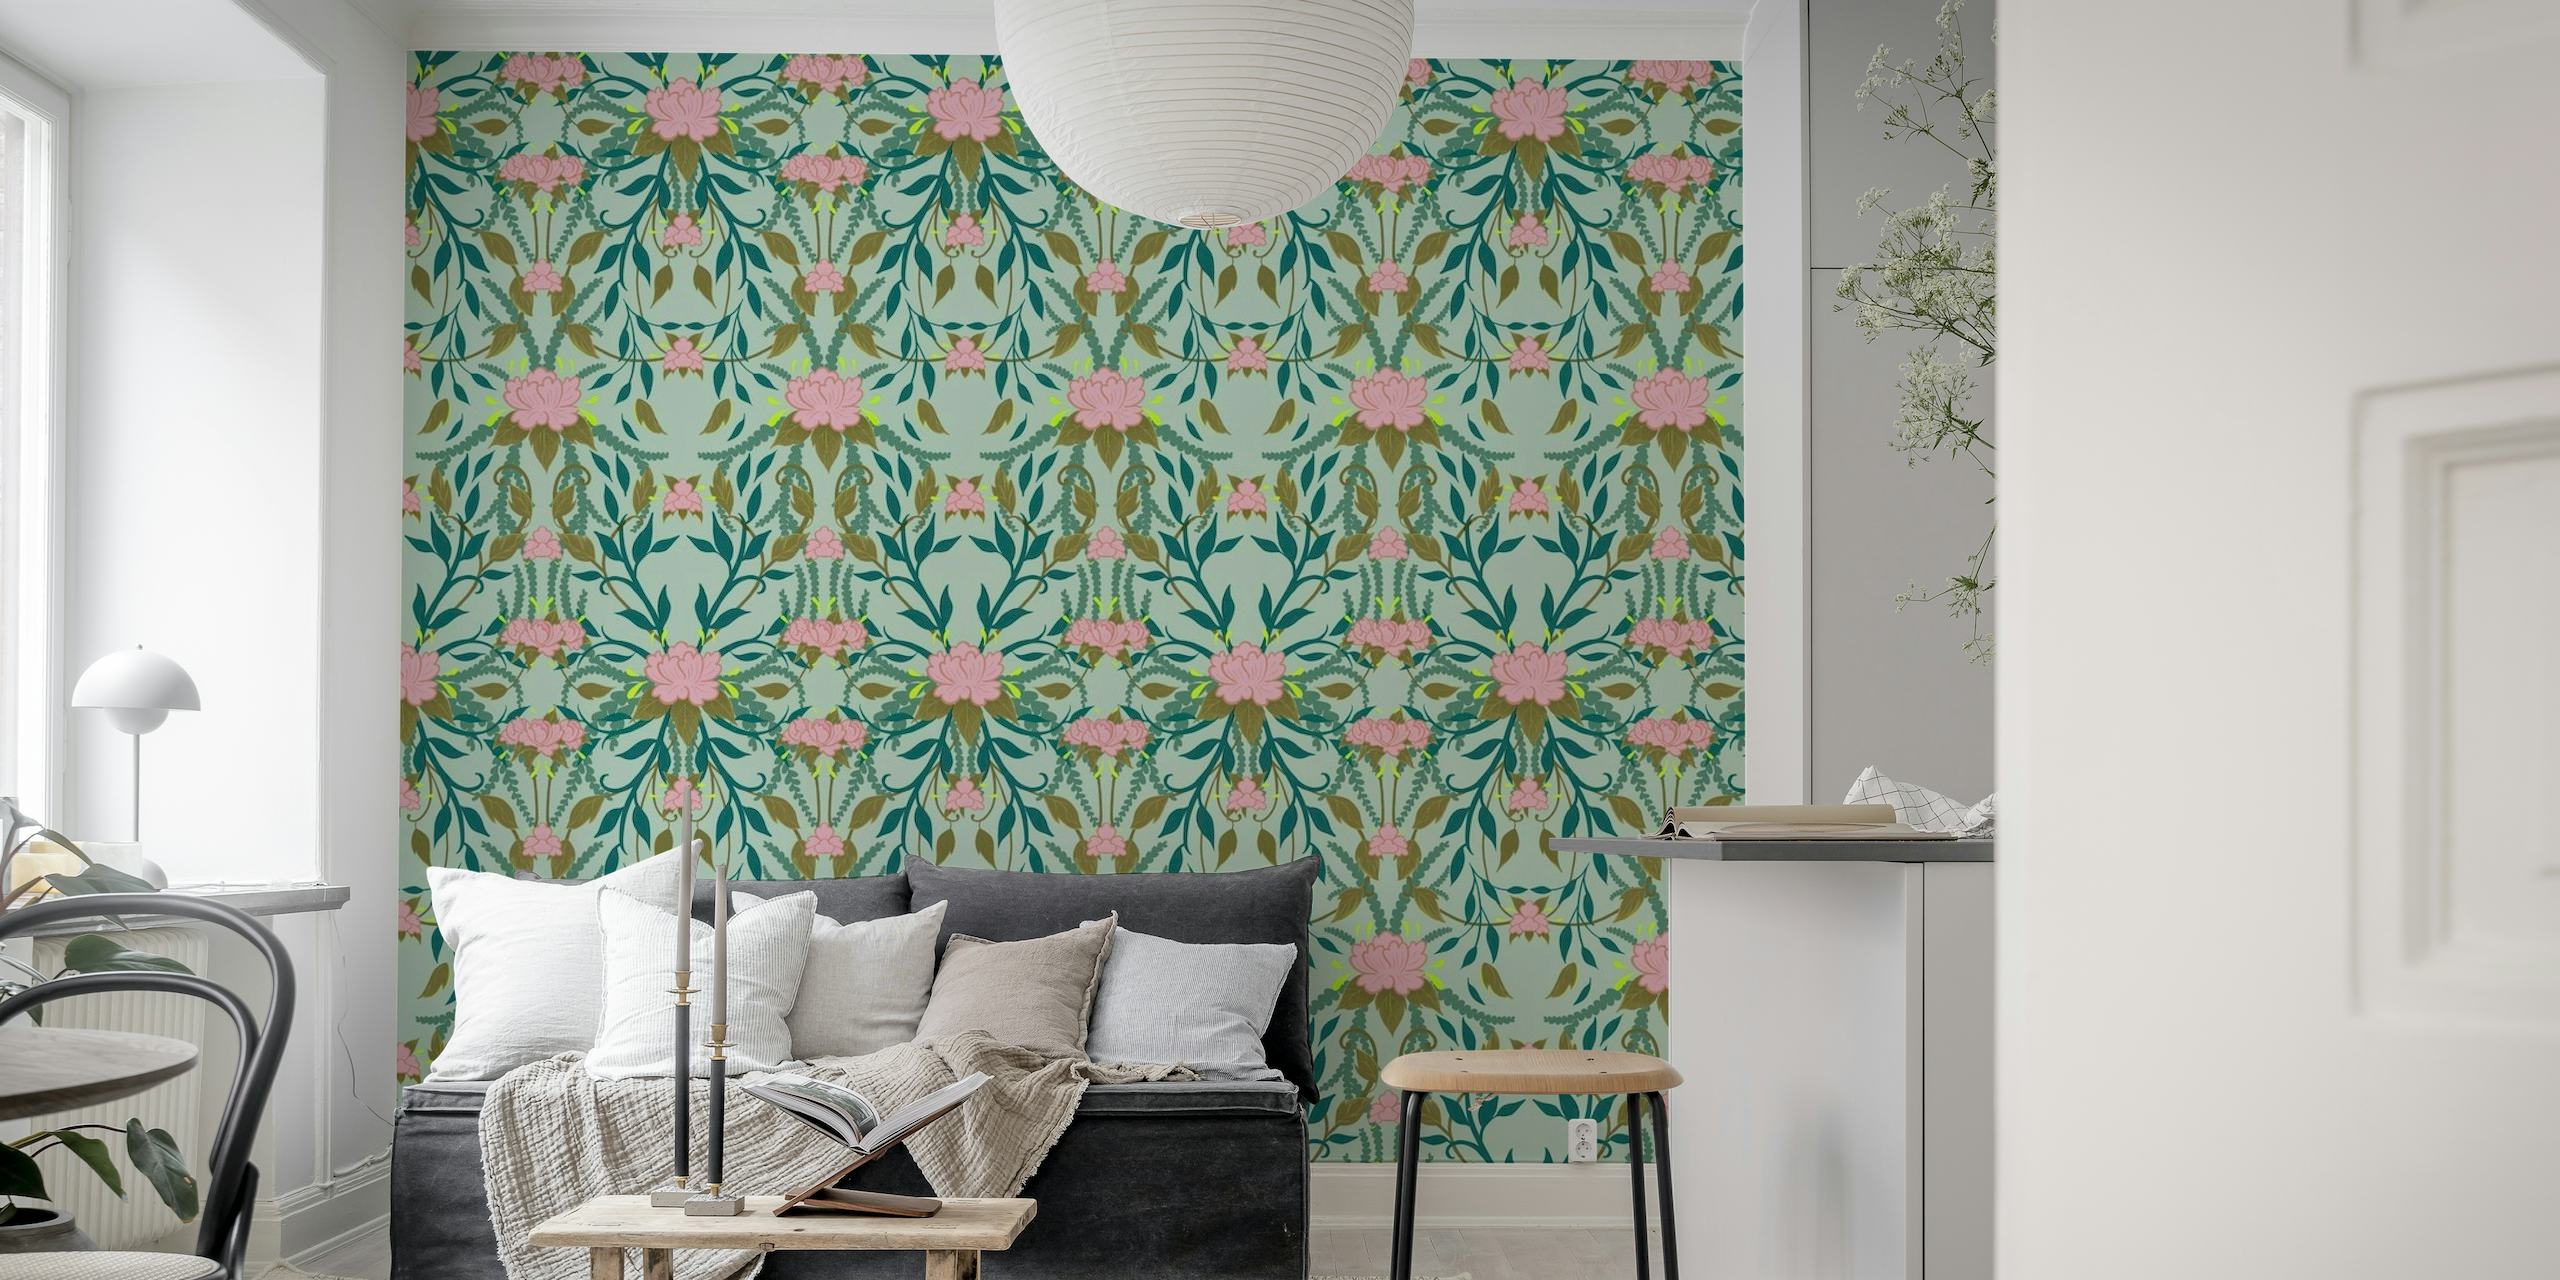 Art Nouveau inspired peony wall mural with soft pink blossoms and green foliage pattern